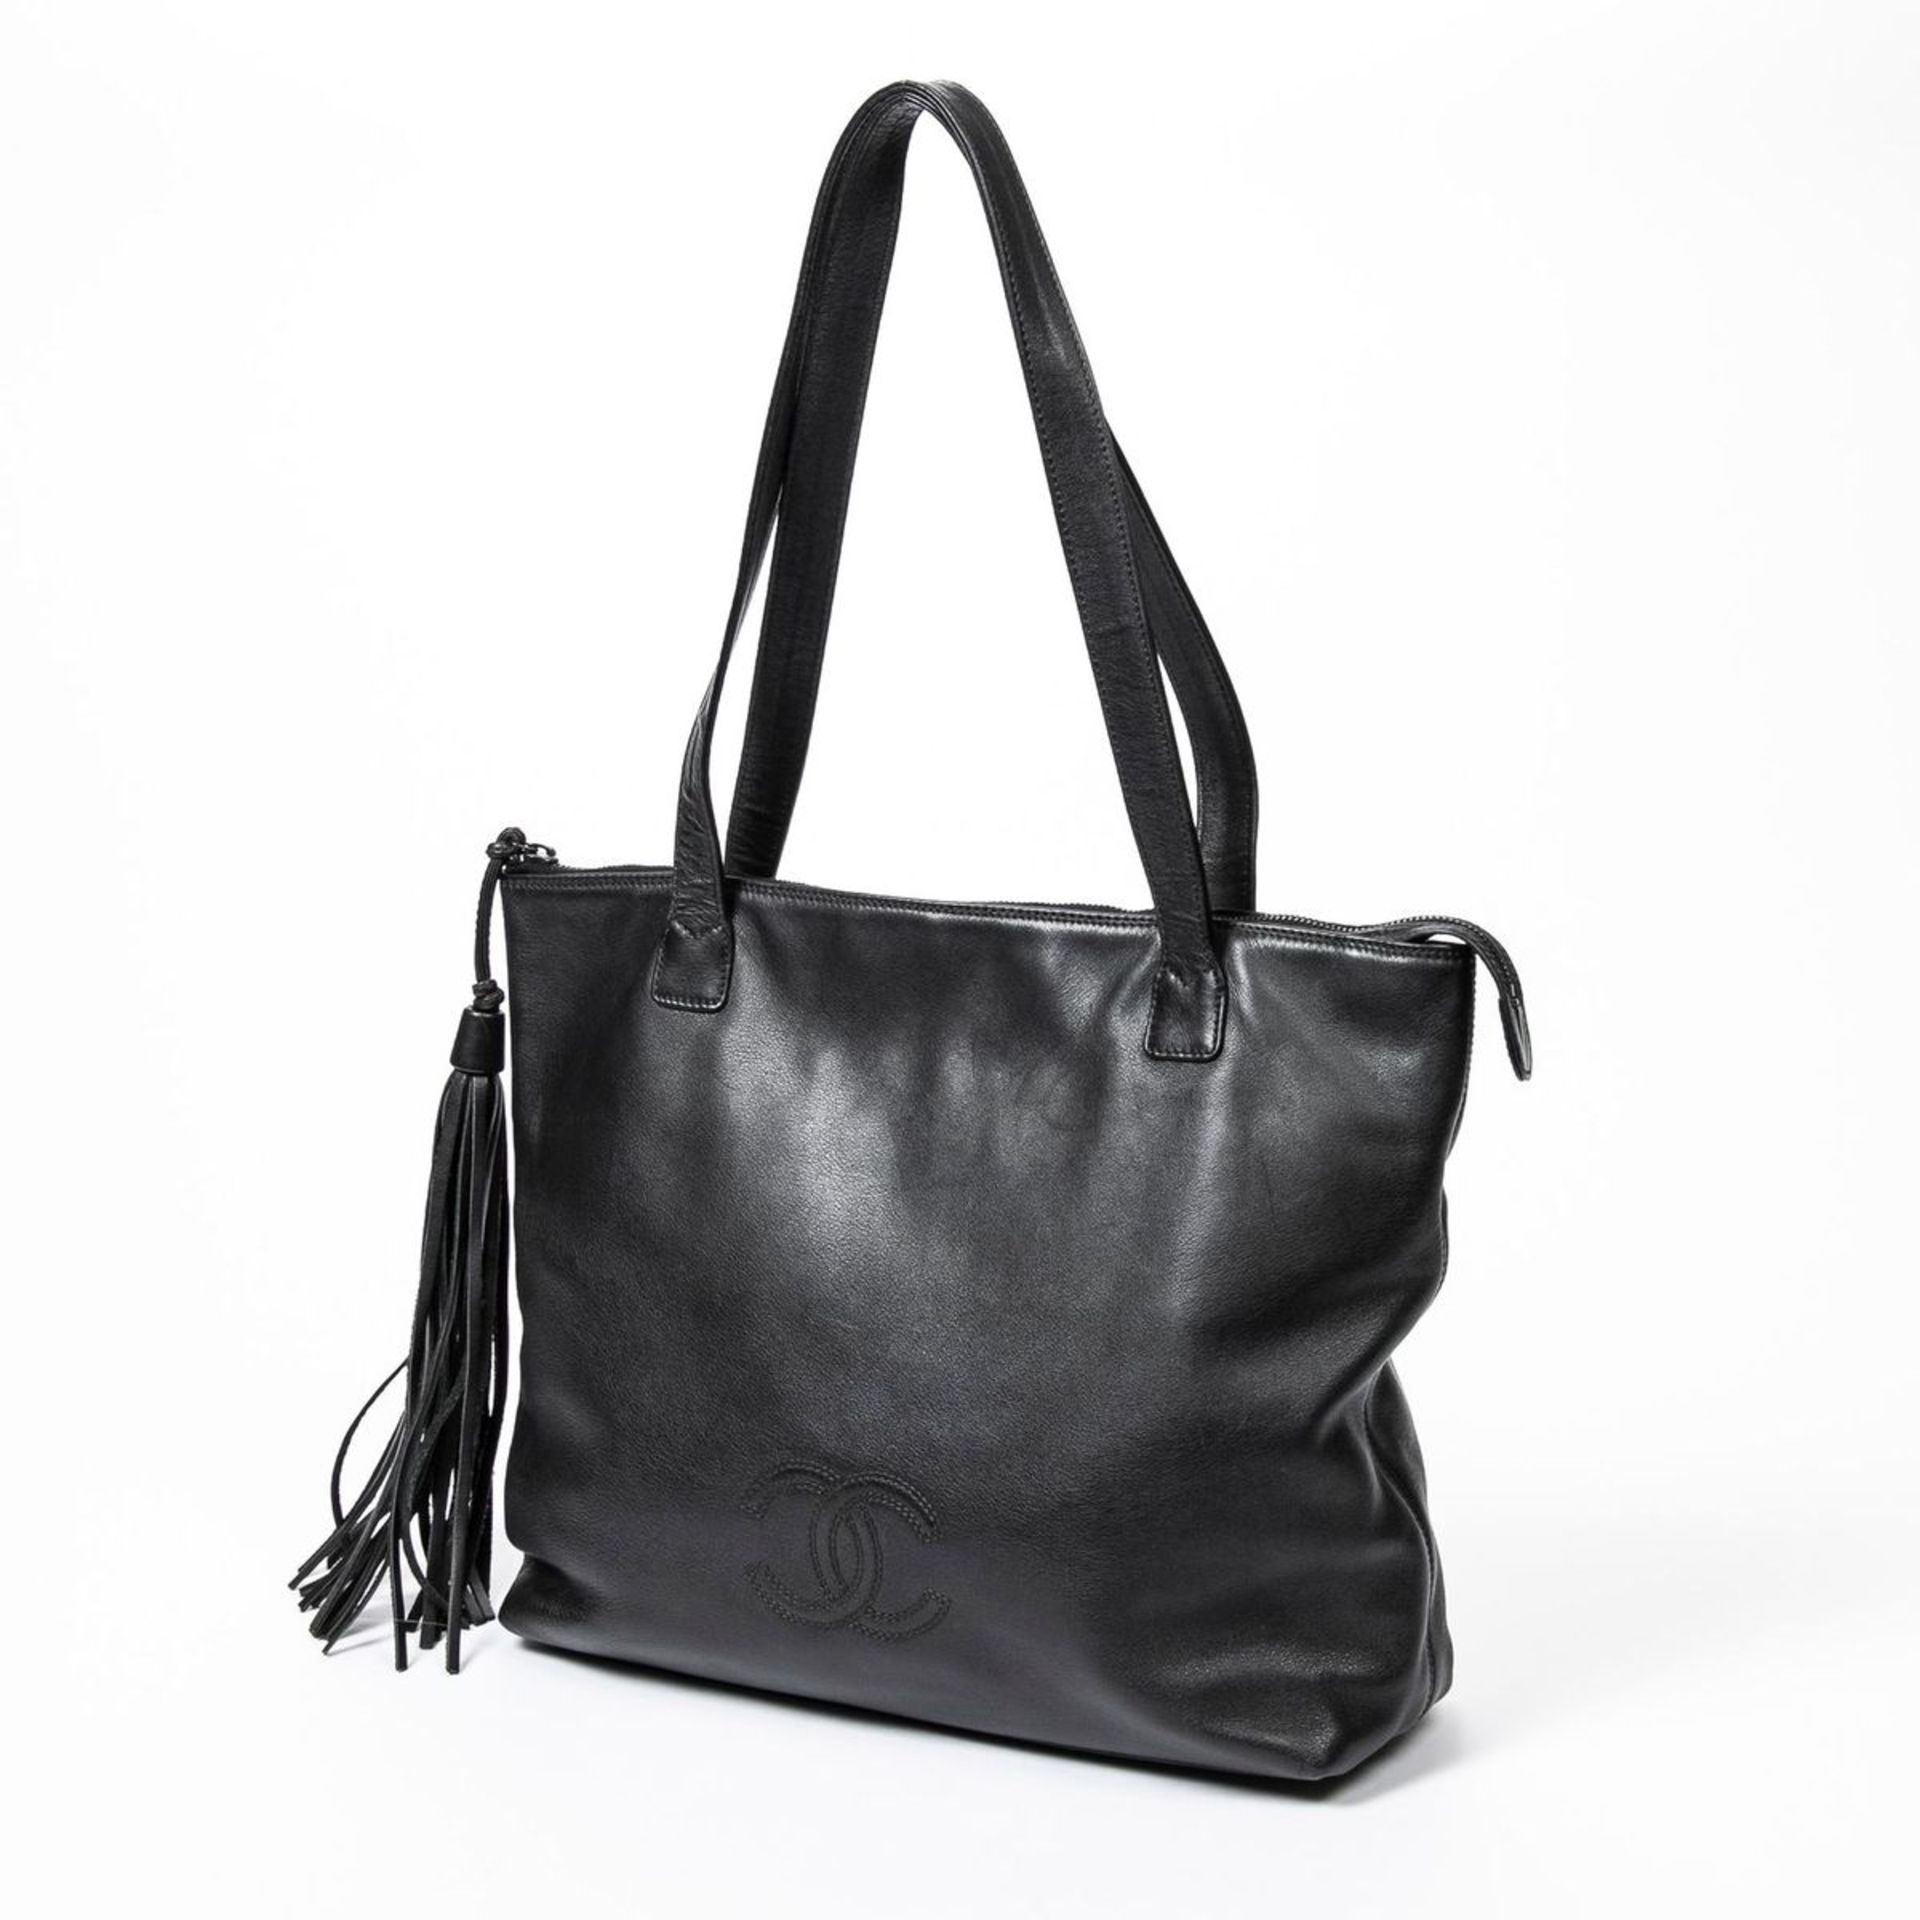 RRP £2800 Chanel Large Tassel Tote in Black AAO5533 - Grade A Please Contact Us Directly For - Image 2 of 3